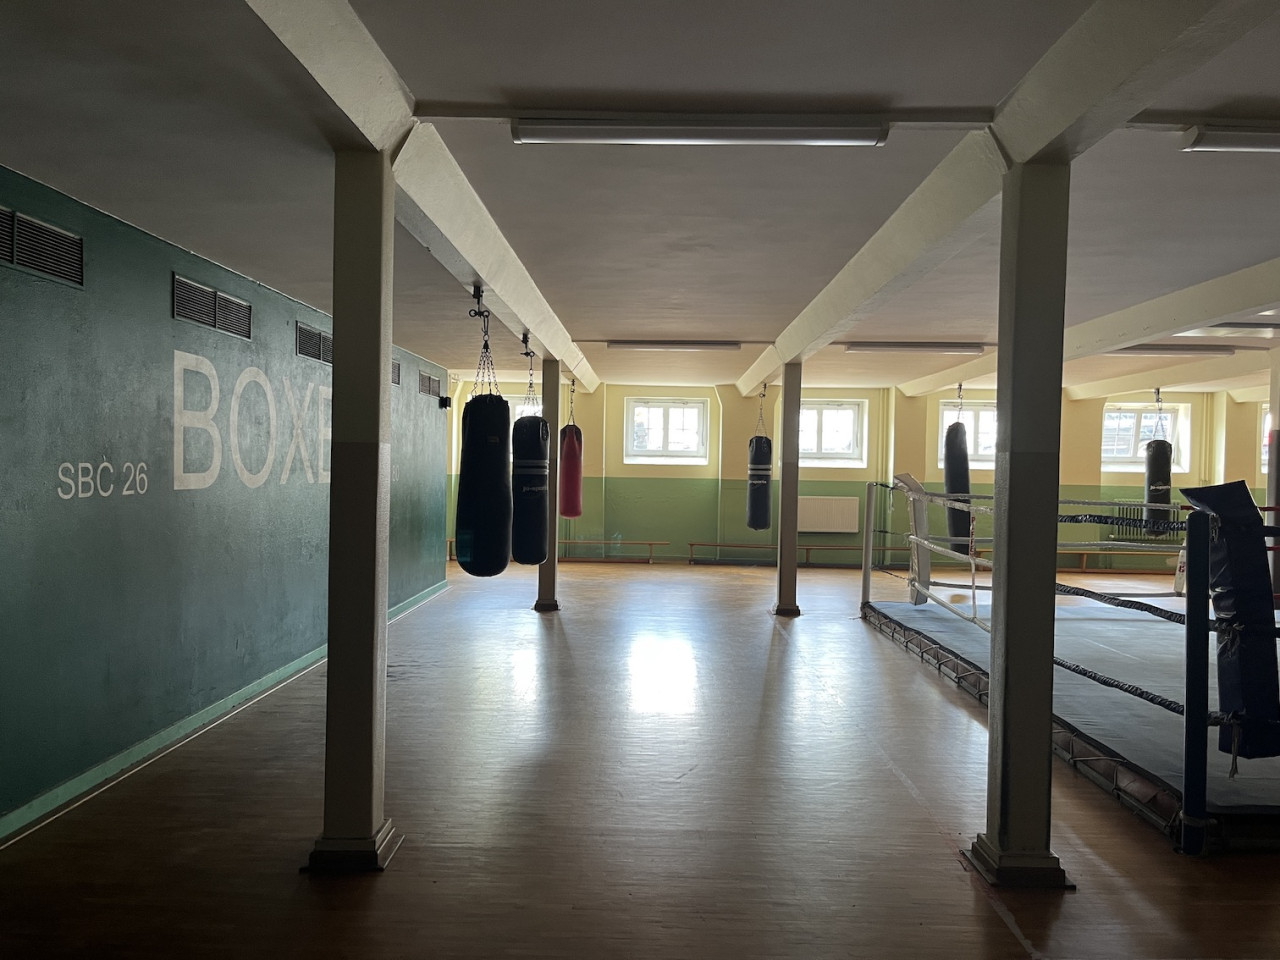 plush74 location film photo event germany berlin vintage gym fitness boxing 174